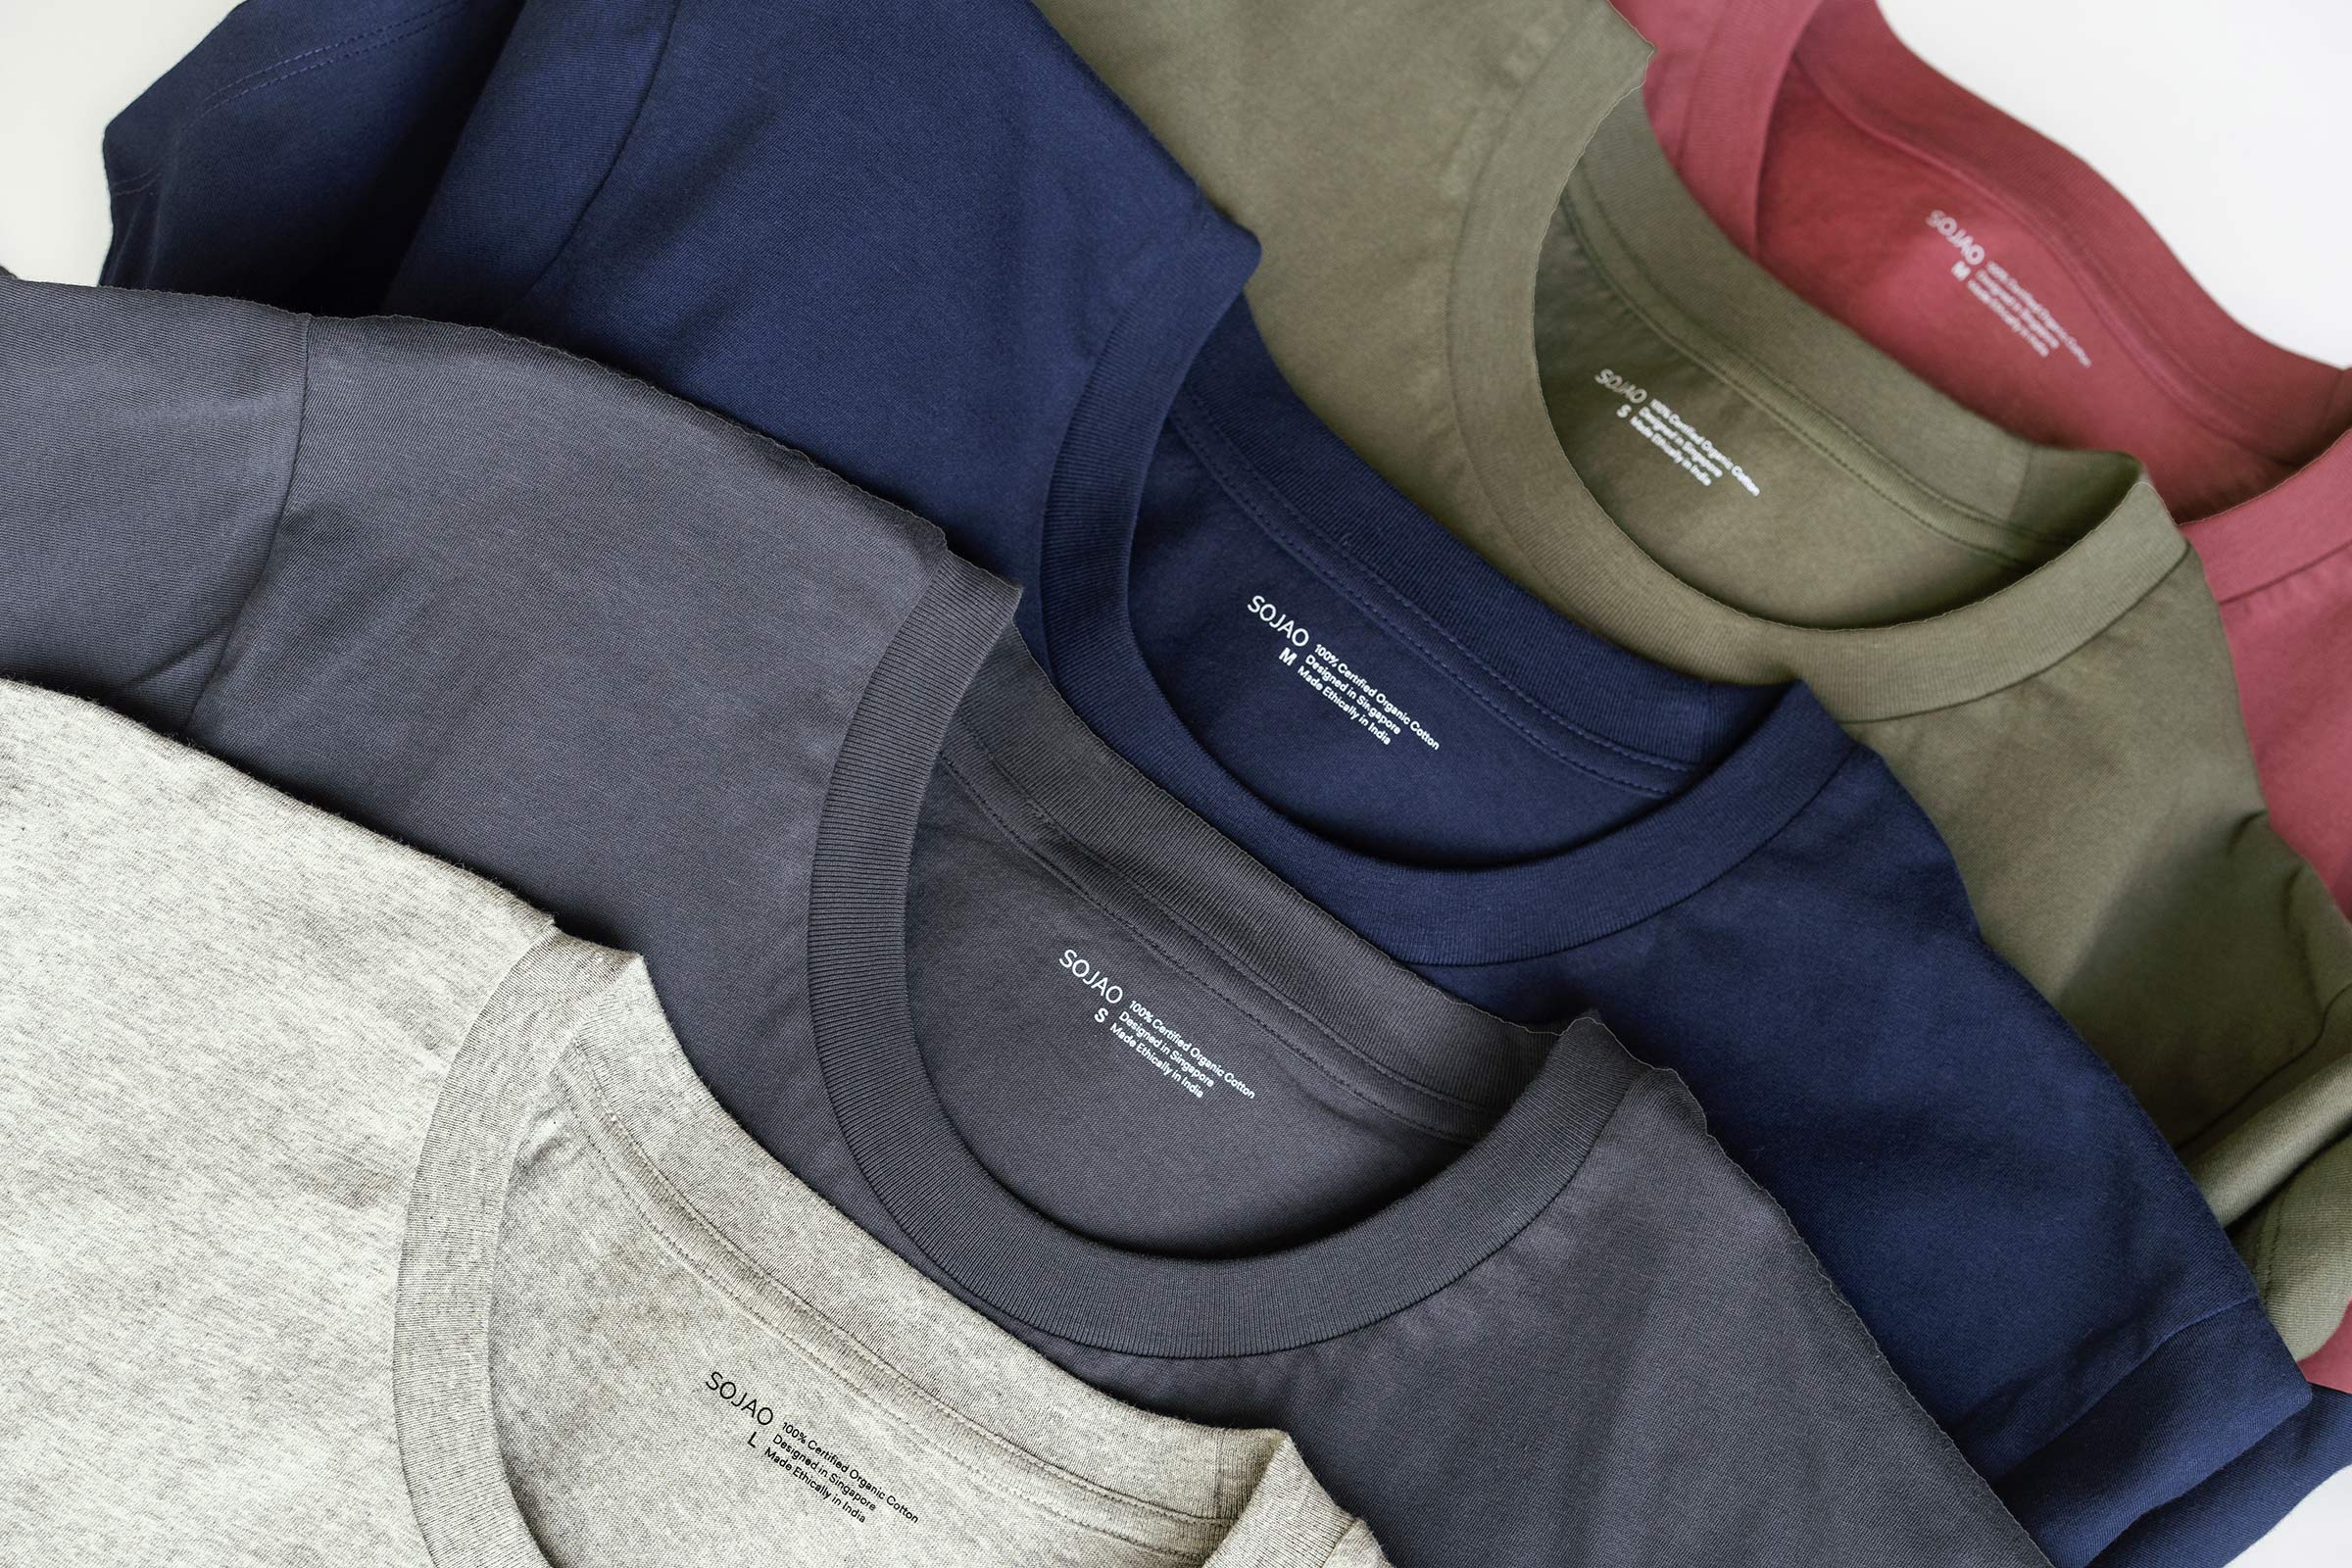 organic-cottom-mens-tee-bundle-details-pebble-midnight-navy-olive-rouge-in-multi-variants-colour-by-sojao